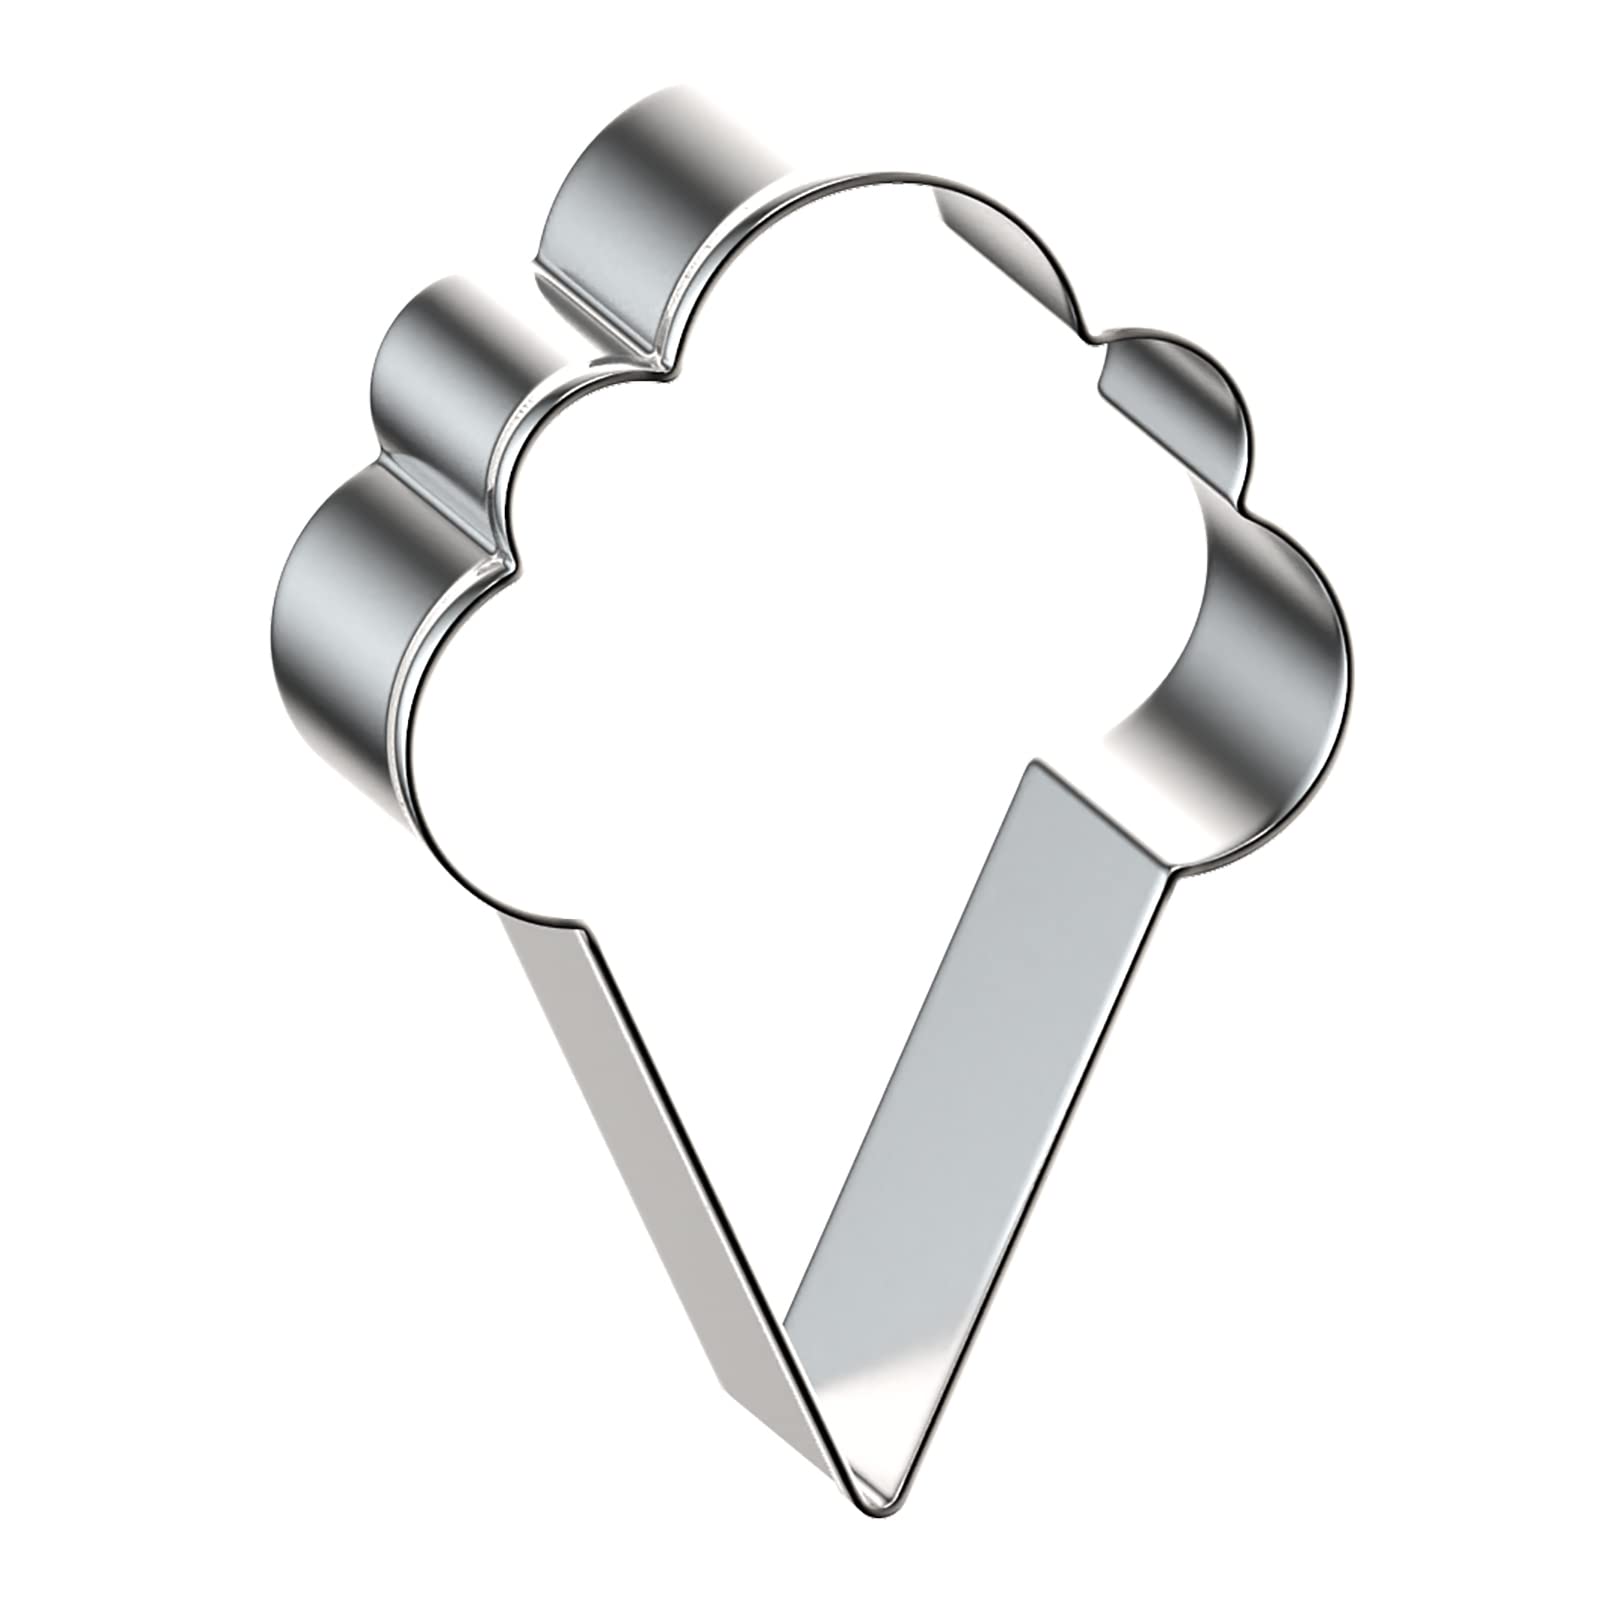 Ice Cream Cone Cookie Cutter Set in Assorted Large Sizes - 5", 4", 3", 2" - 4 Piece - Stainless Steel